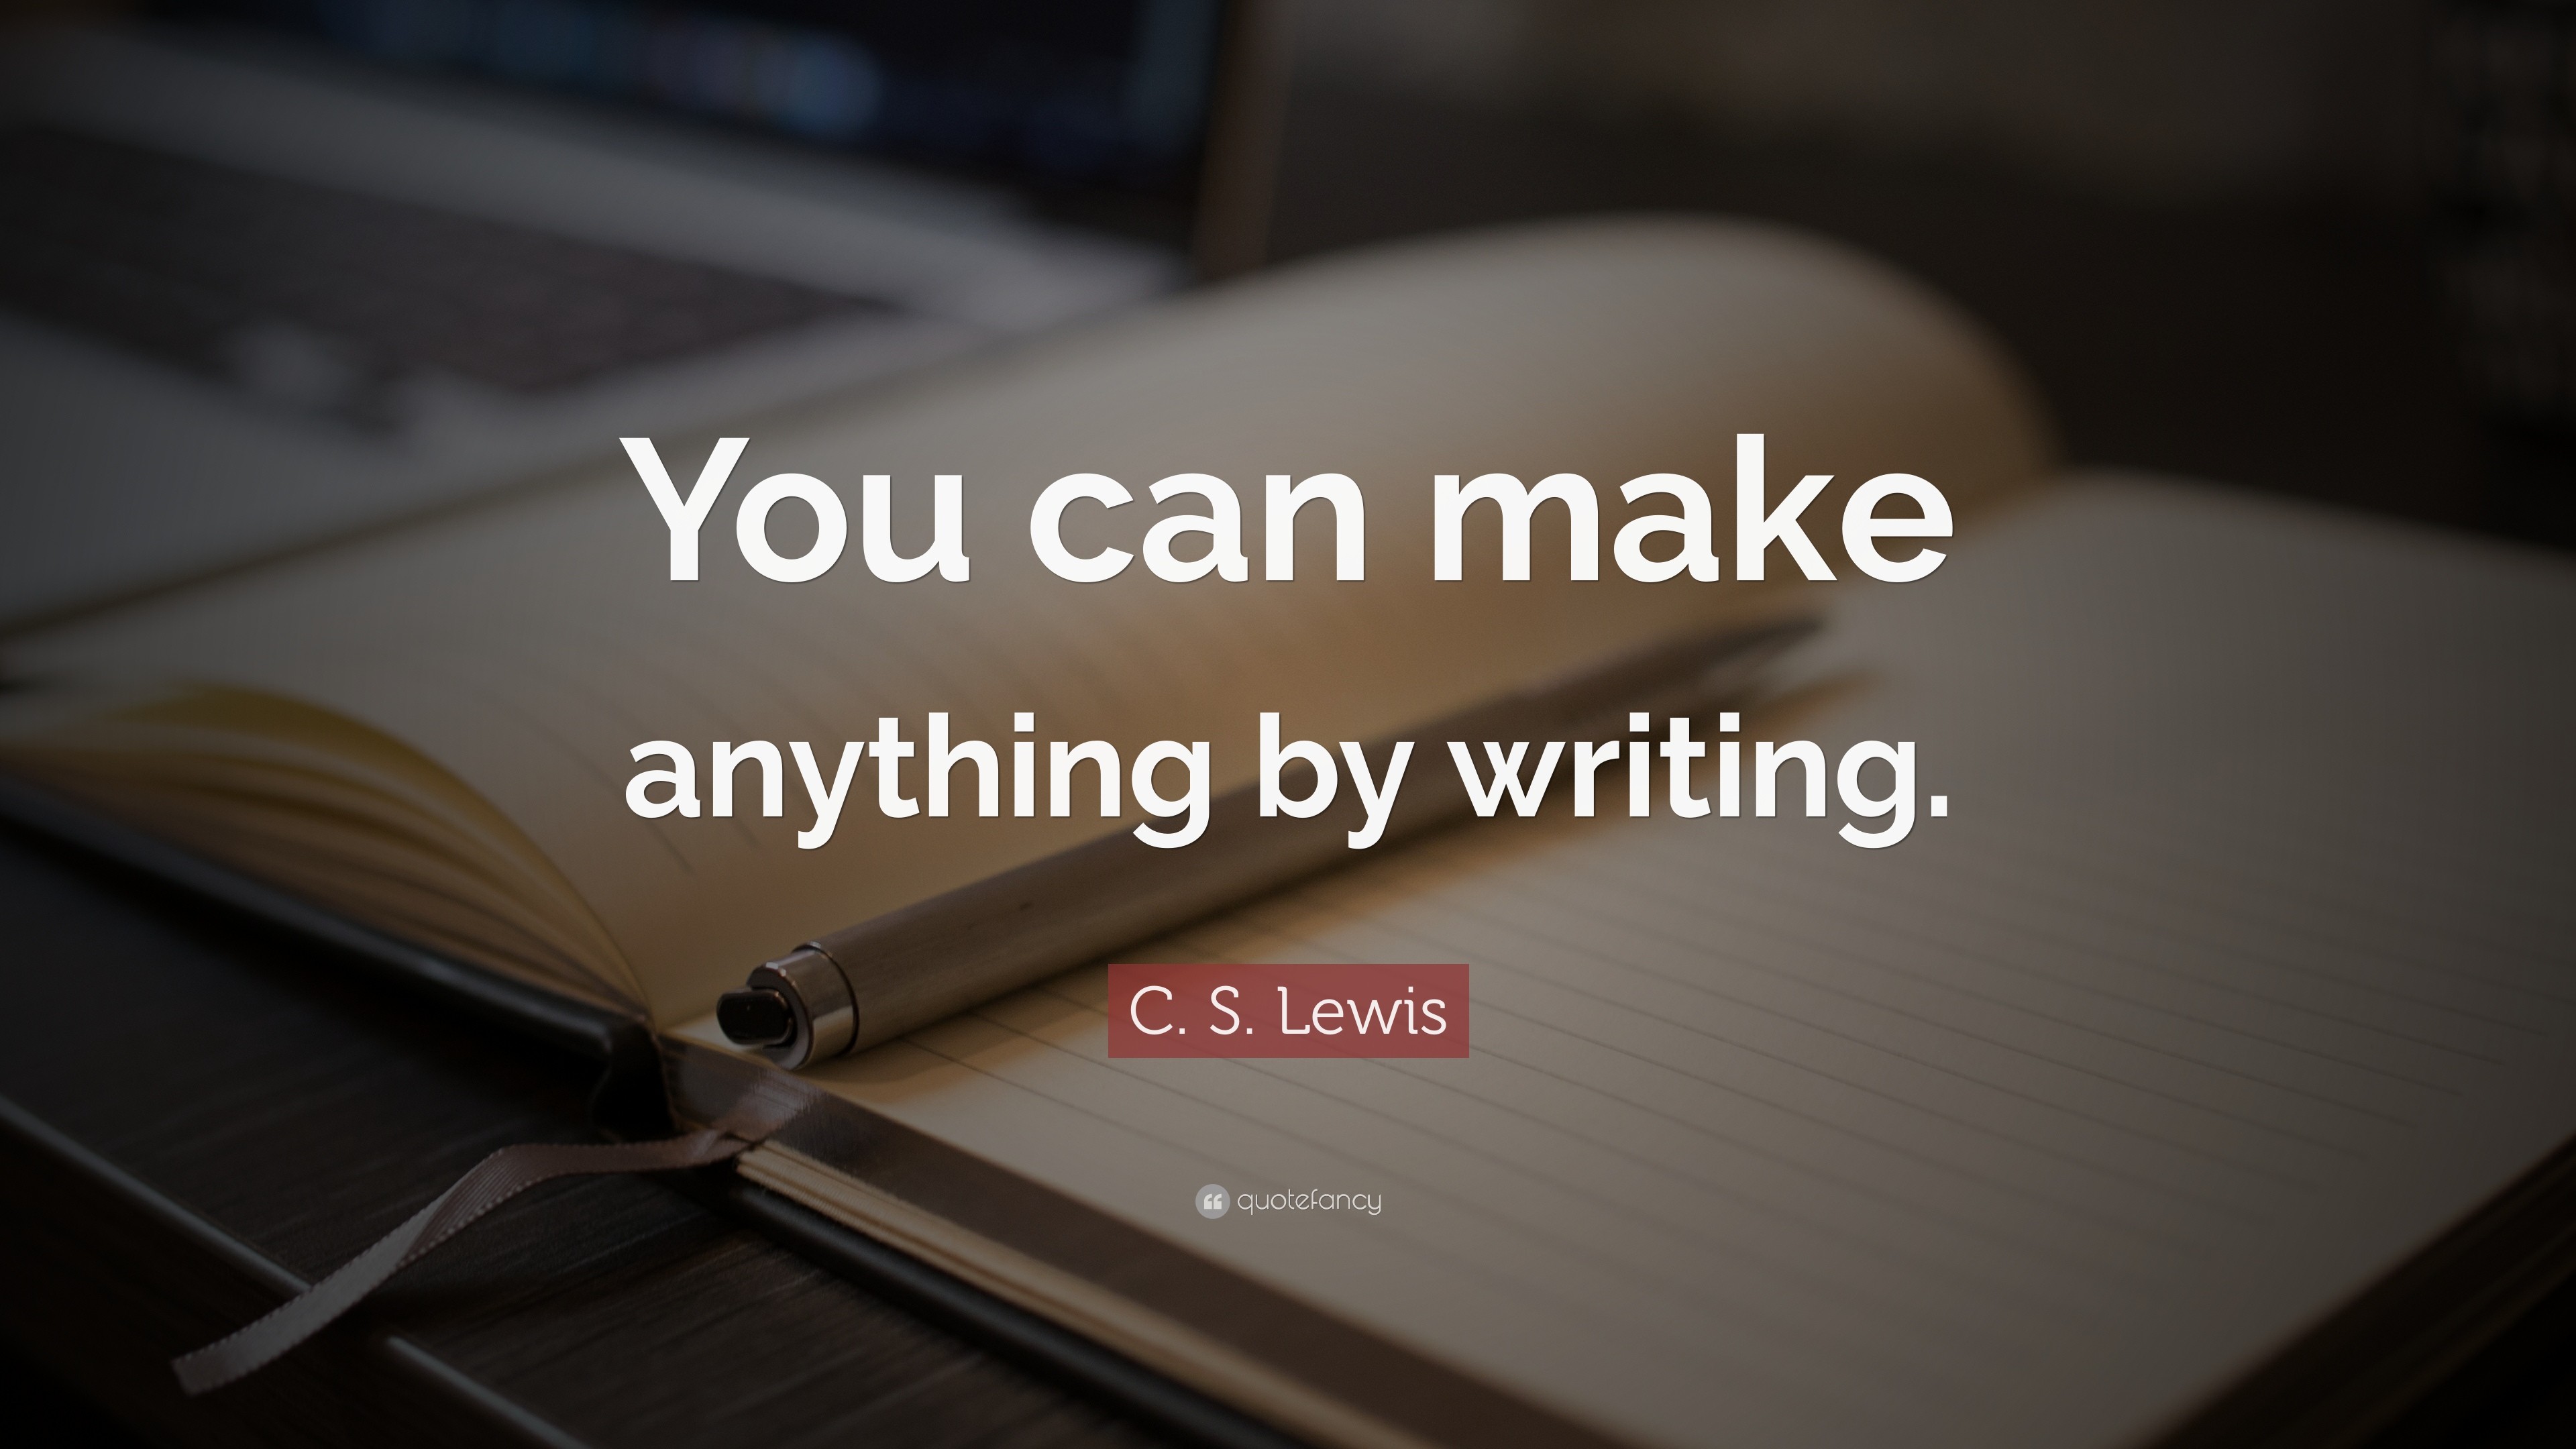 3840x2160 Quotes About Writing: “You can make anything by writing.” — C. S. Lewis